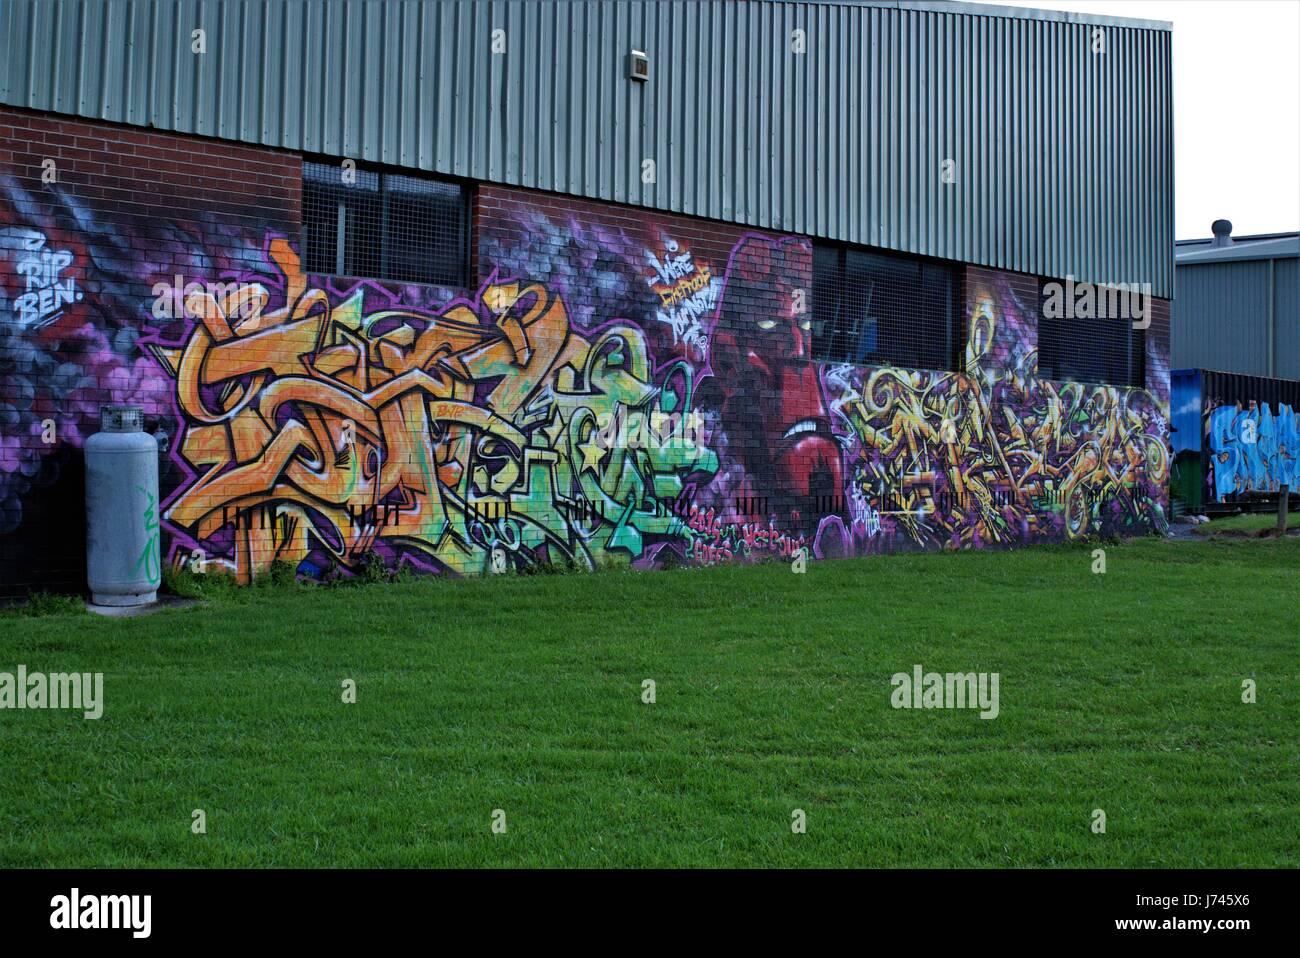 Graffiti by unknown artist. Graffito. Graffiti on a wall, building and grass as on 21 May 2017 in Australia Stock Photo